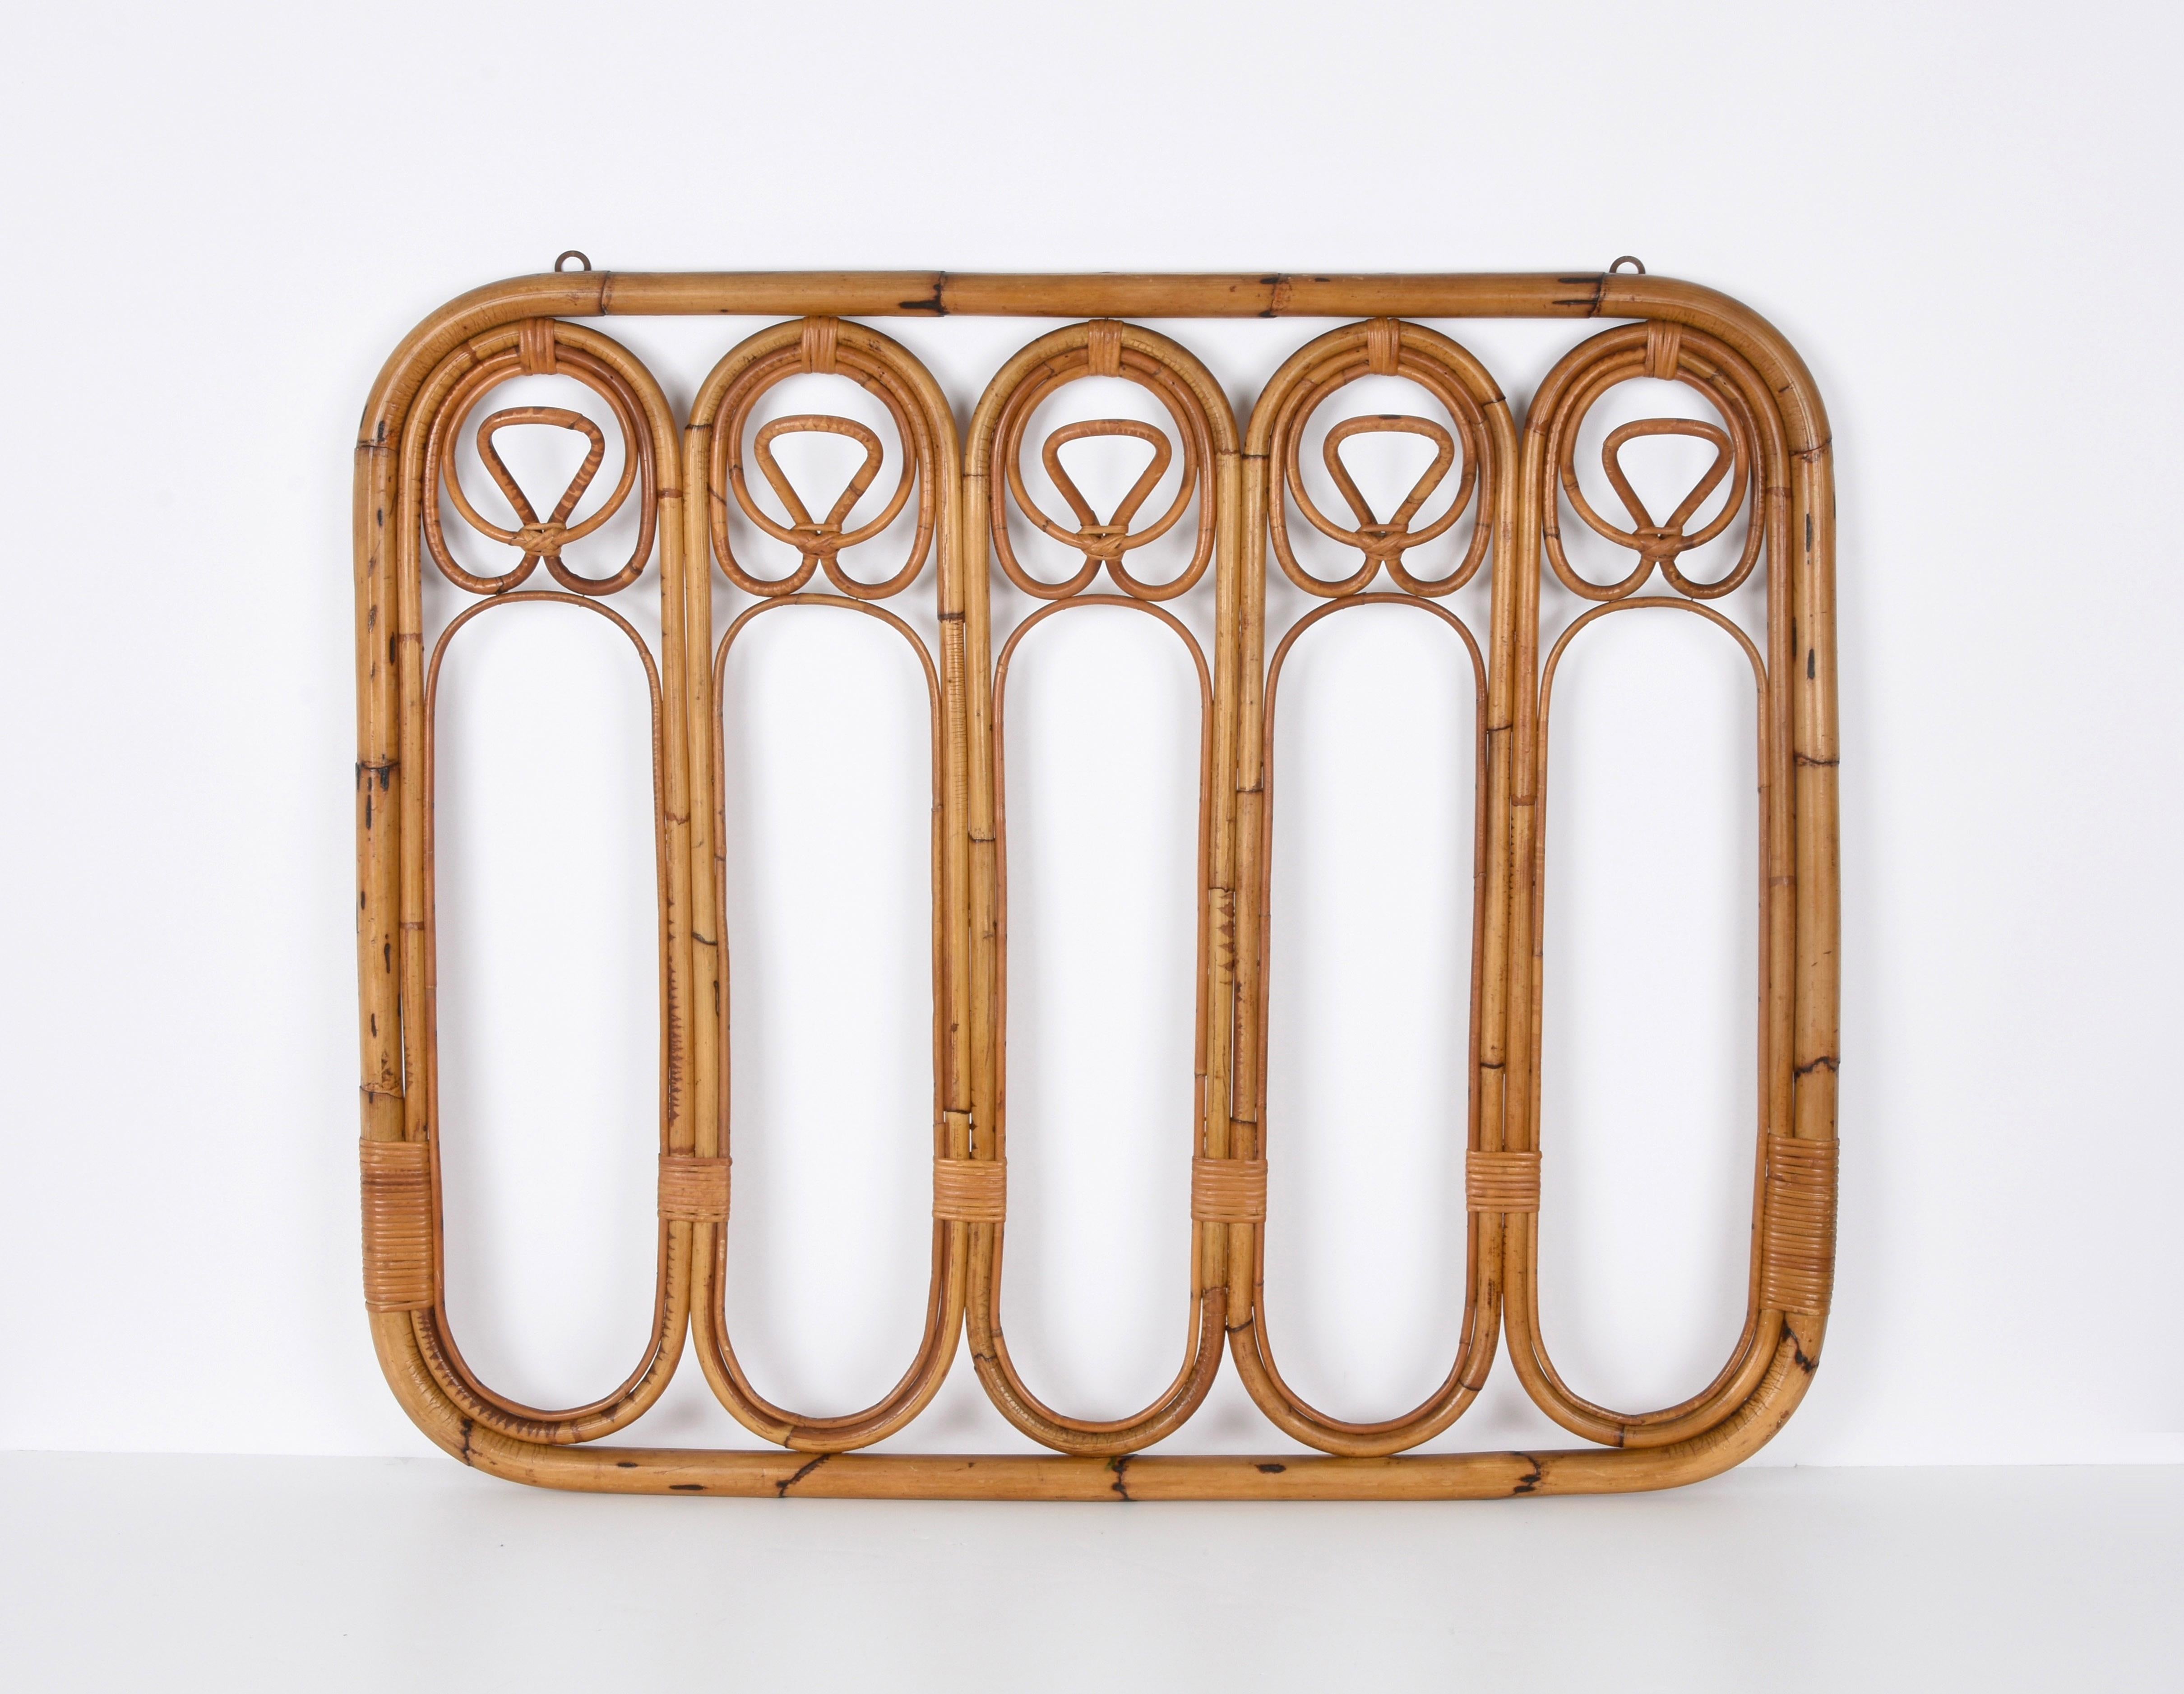 Incredible French Riviera midcentury rattan and bamboo coat hanger. This wonderful piece was made in Italy during the 1960s.

This unique item features a structure in bamboo canes with five rattan upper hooks and lower hooks for hanging